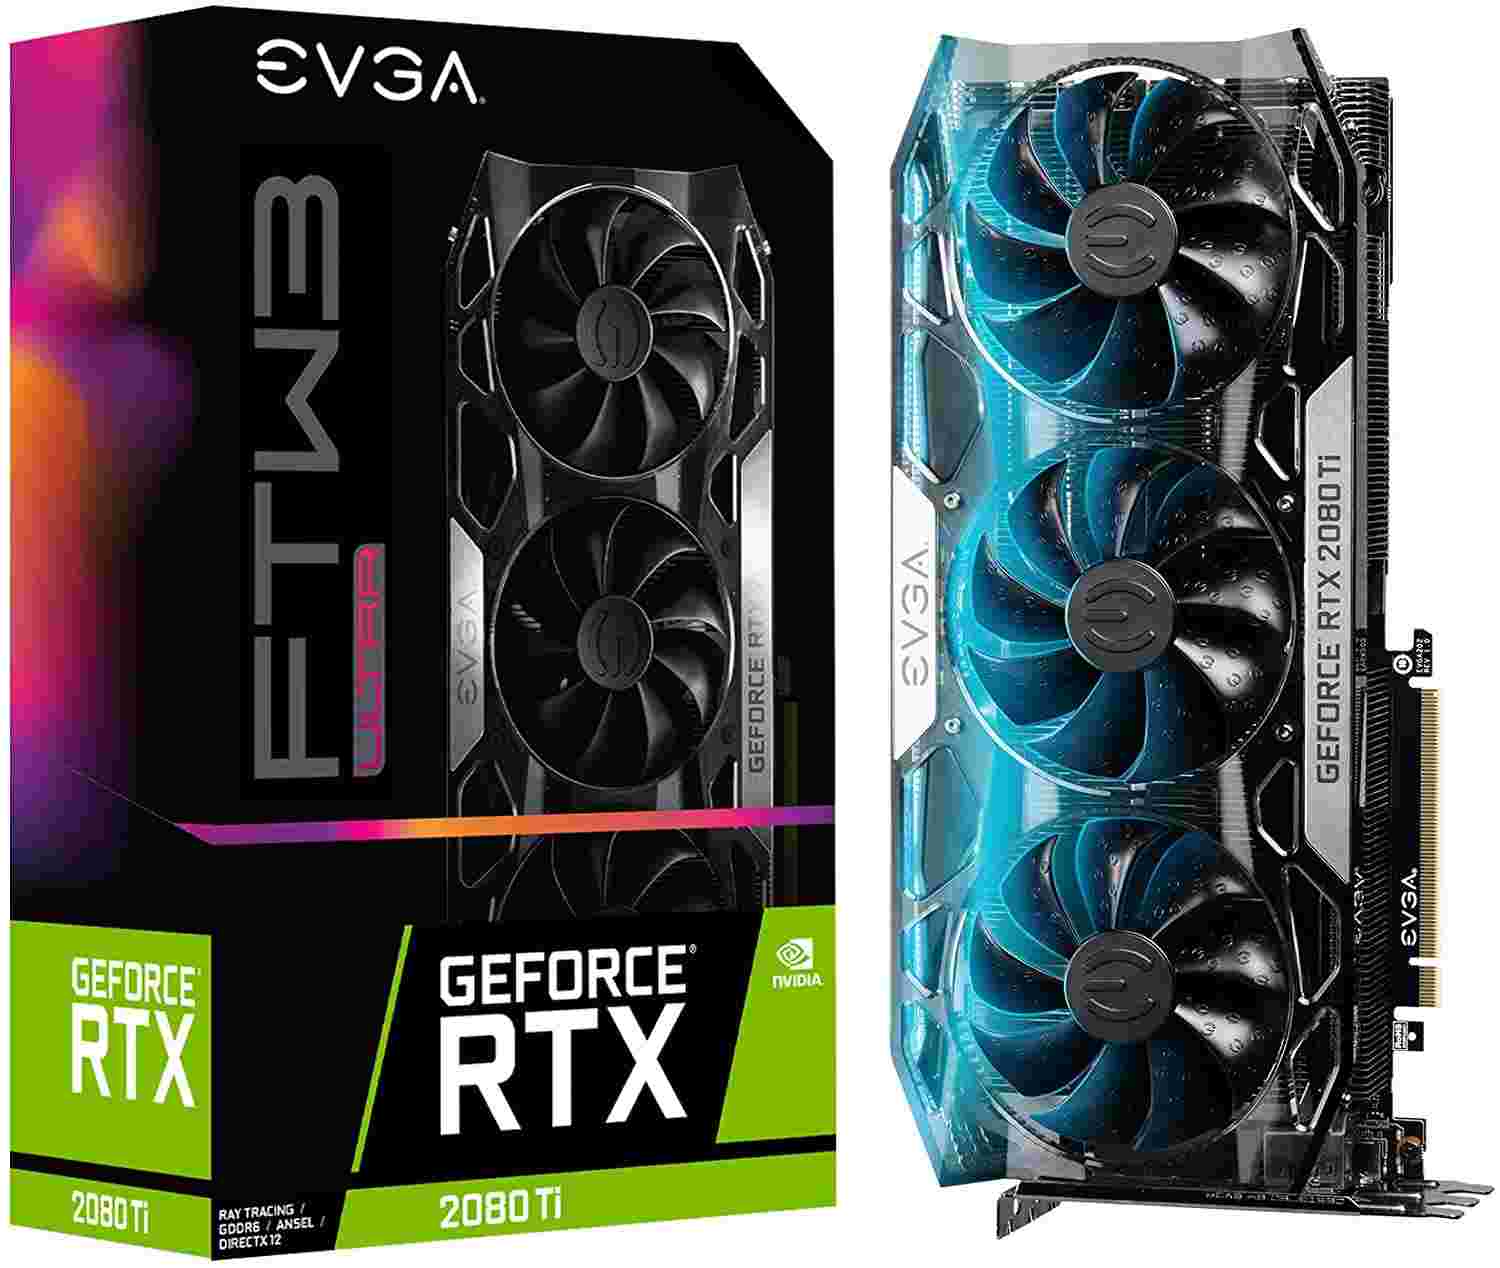 Evga - best graphics card for rendering